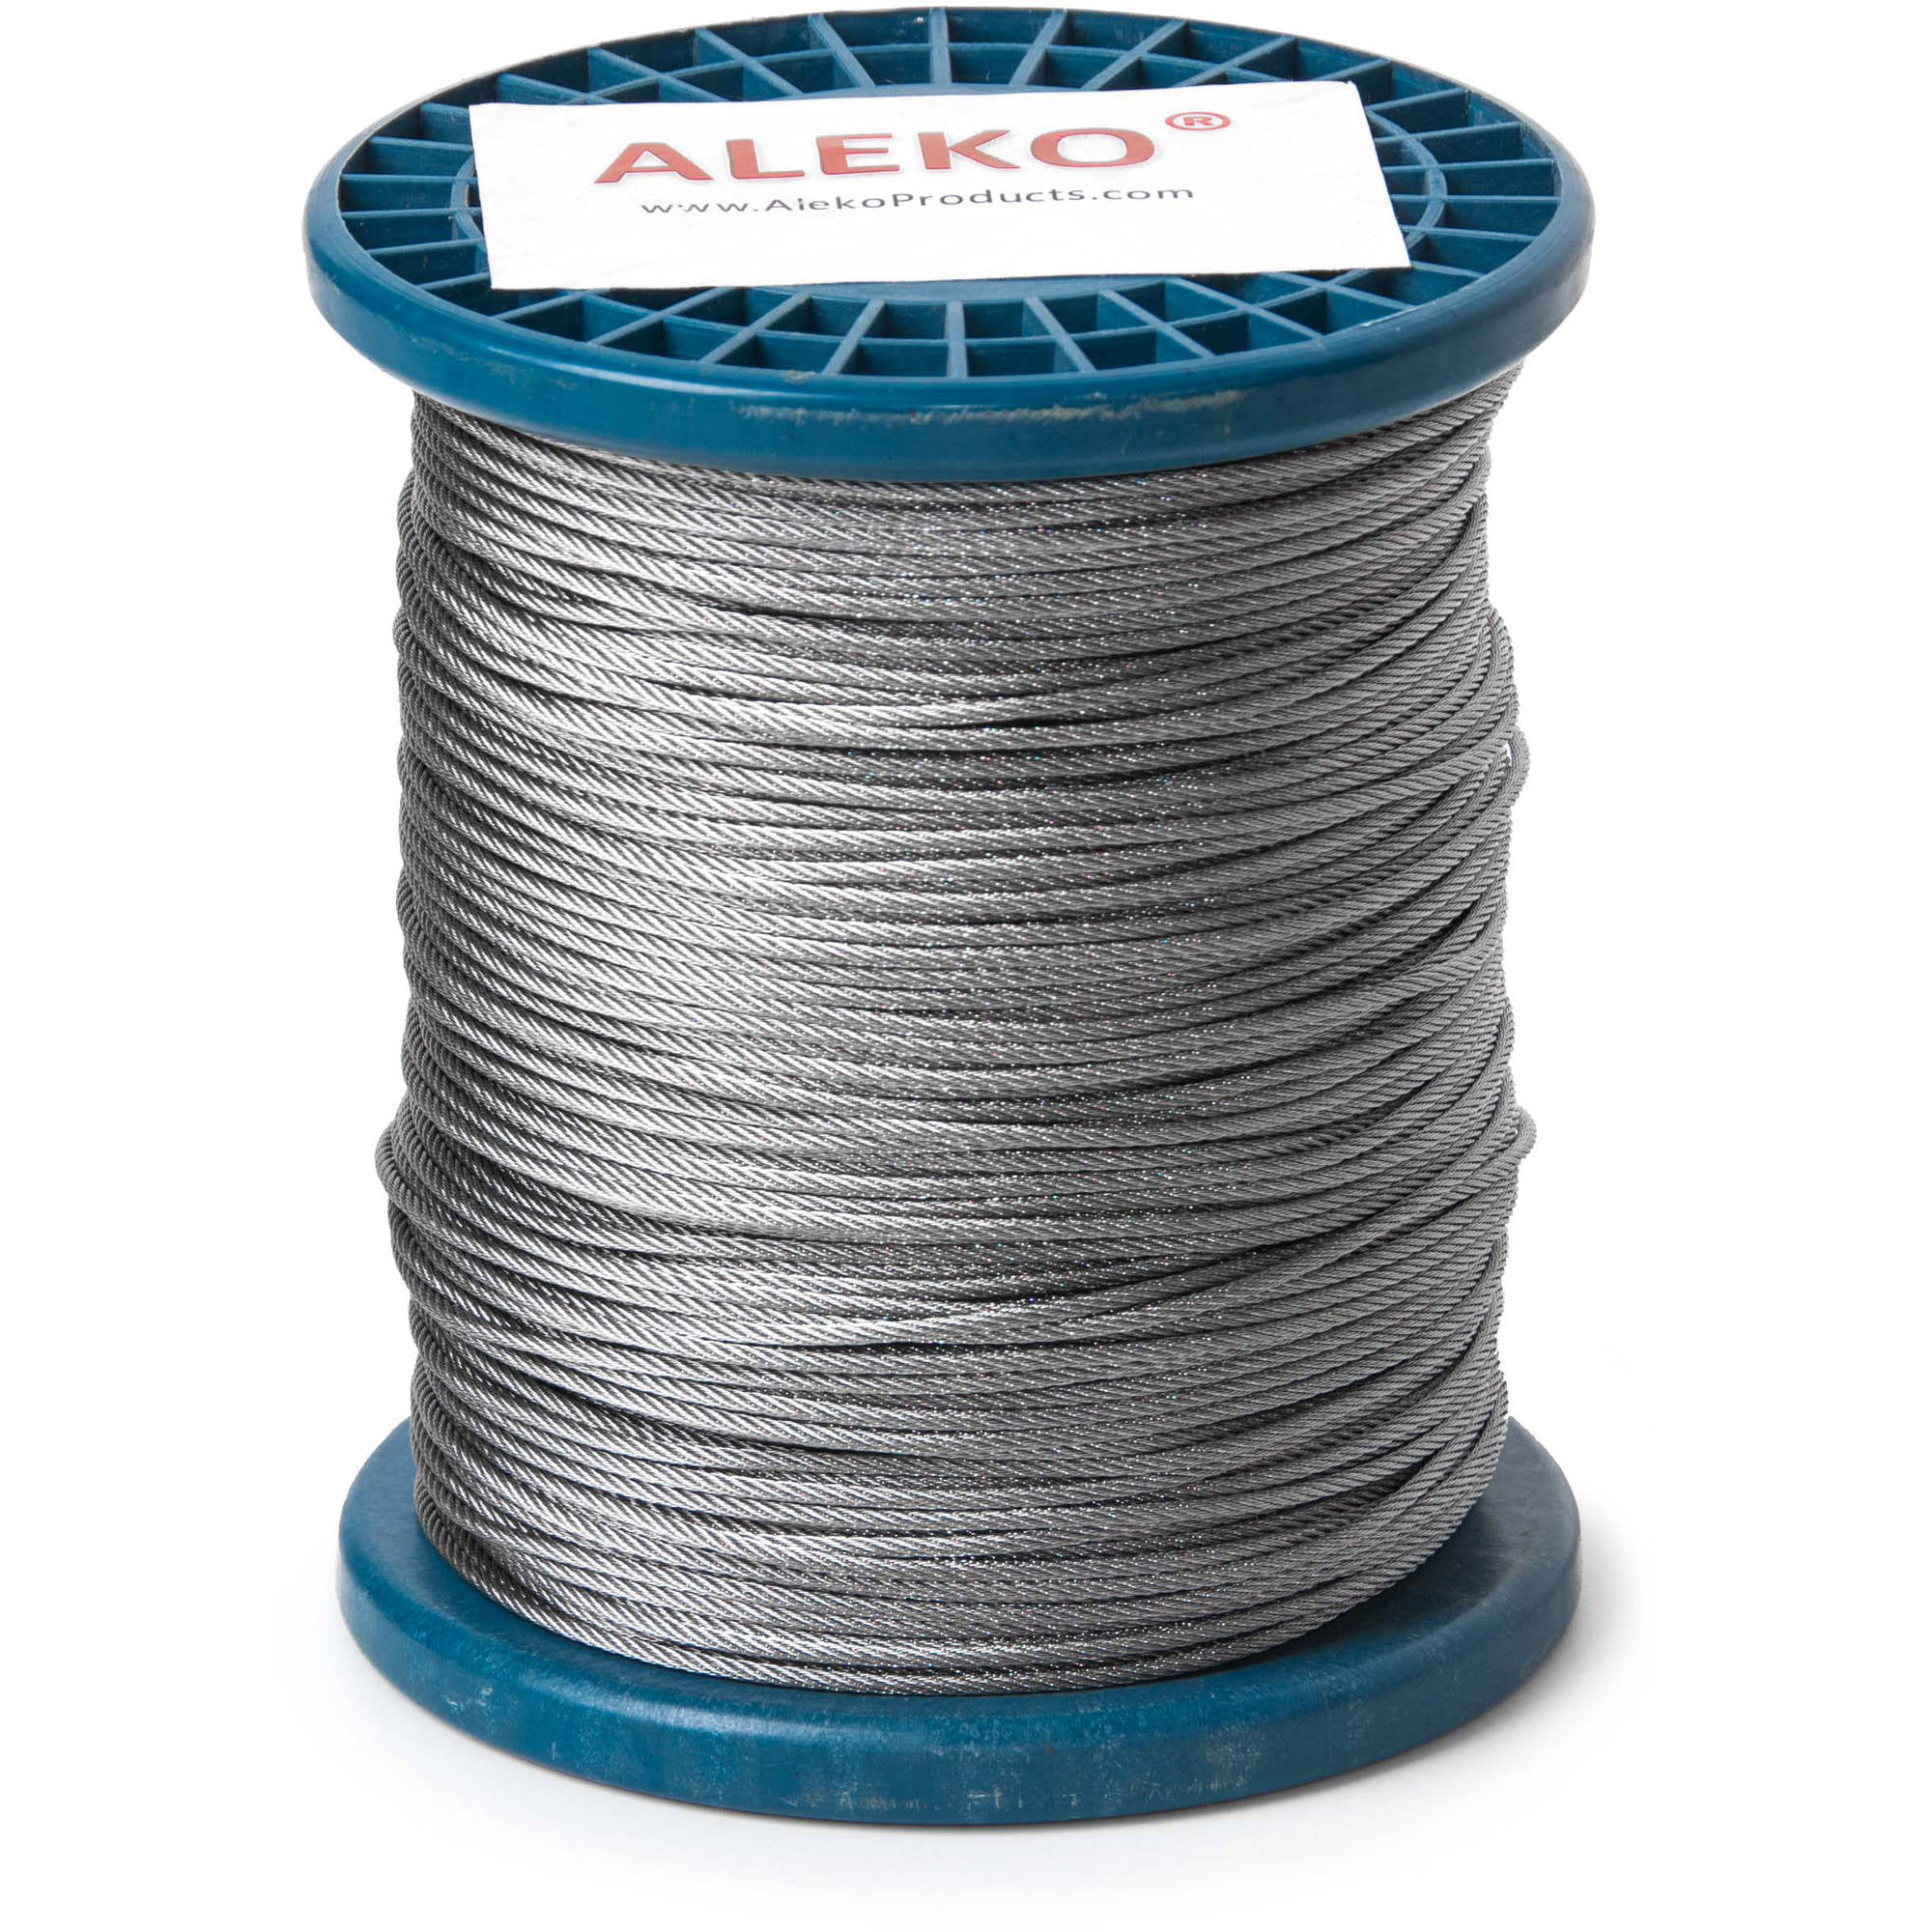 ALEKO Steel Cable 1/16 Inch 7X7 304 Stainless Aircraft Wire Rope 500 Feet 